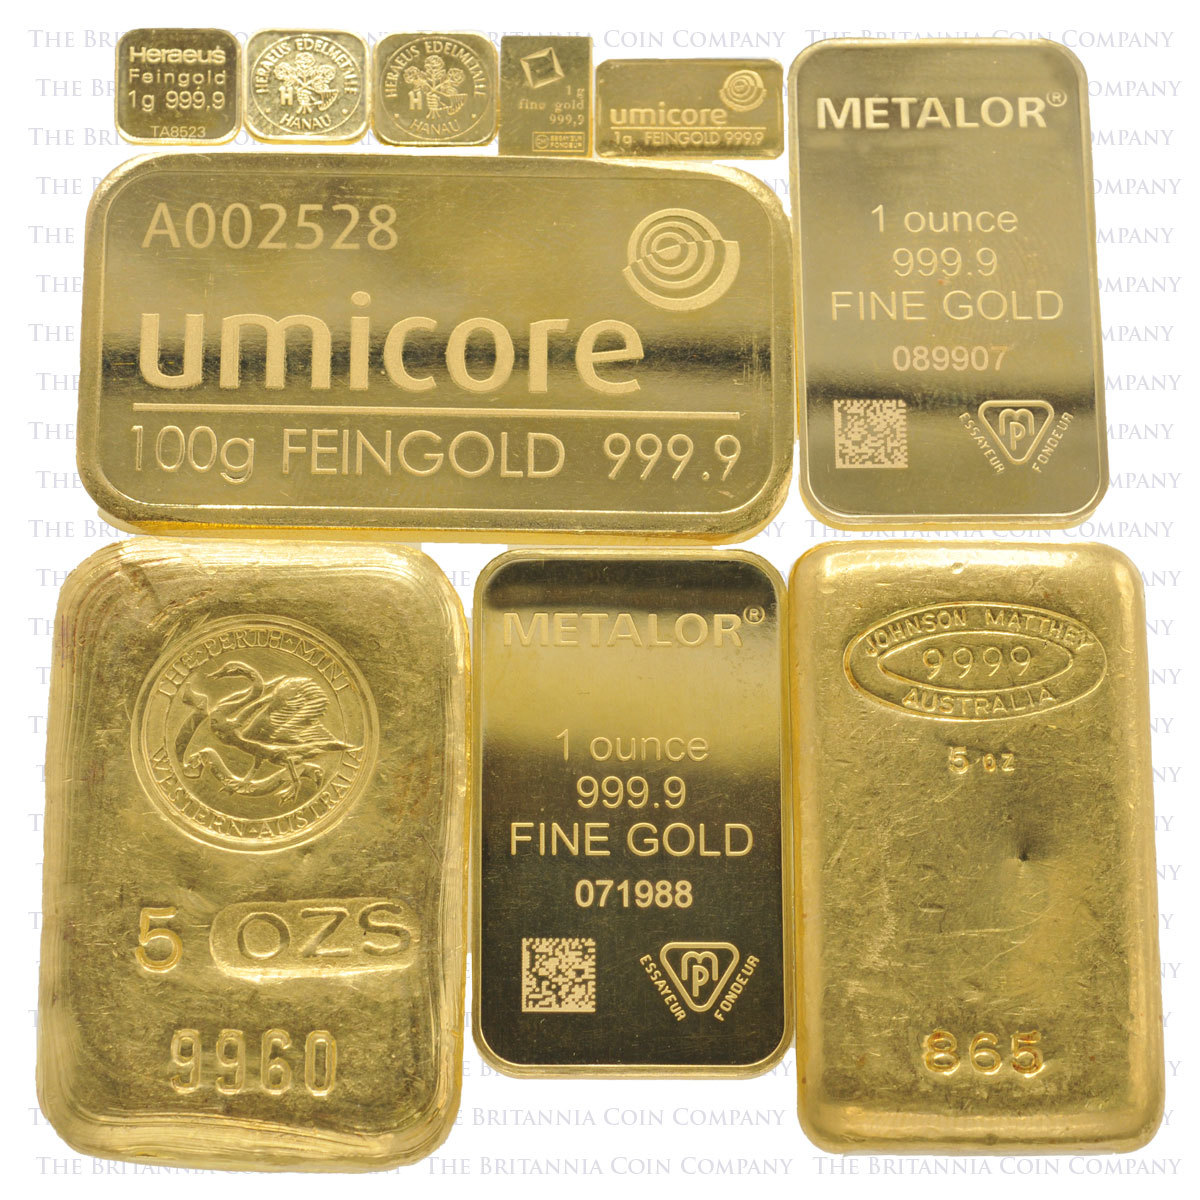 Best Gold Bars to Buy for Investment Top 5 Gold Bars for Investors Gold IRA Guide